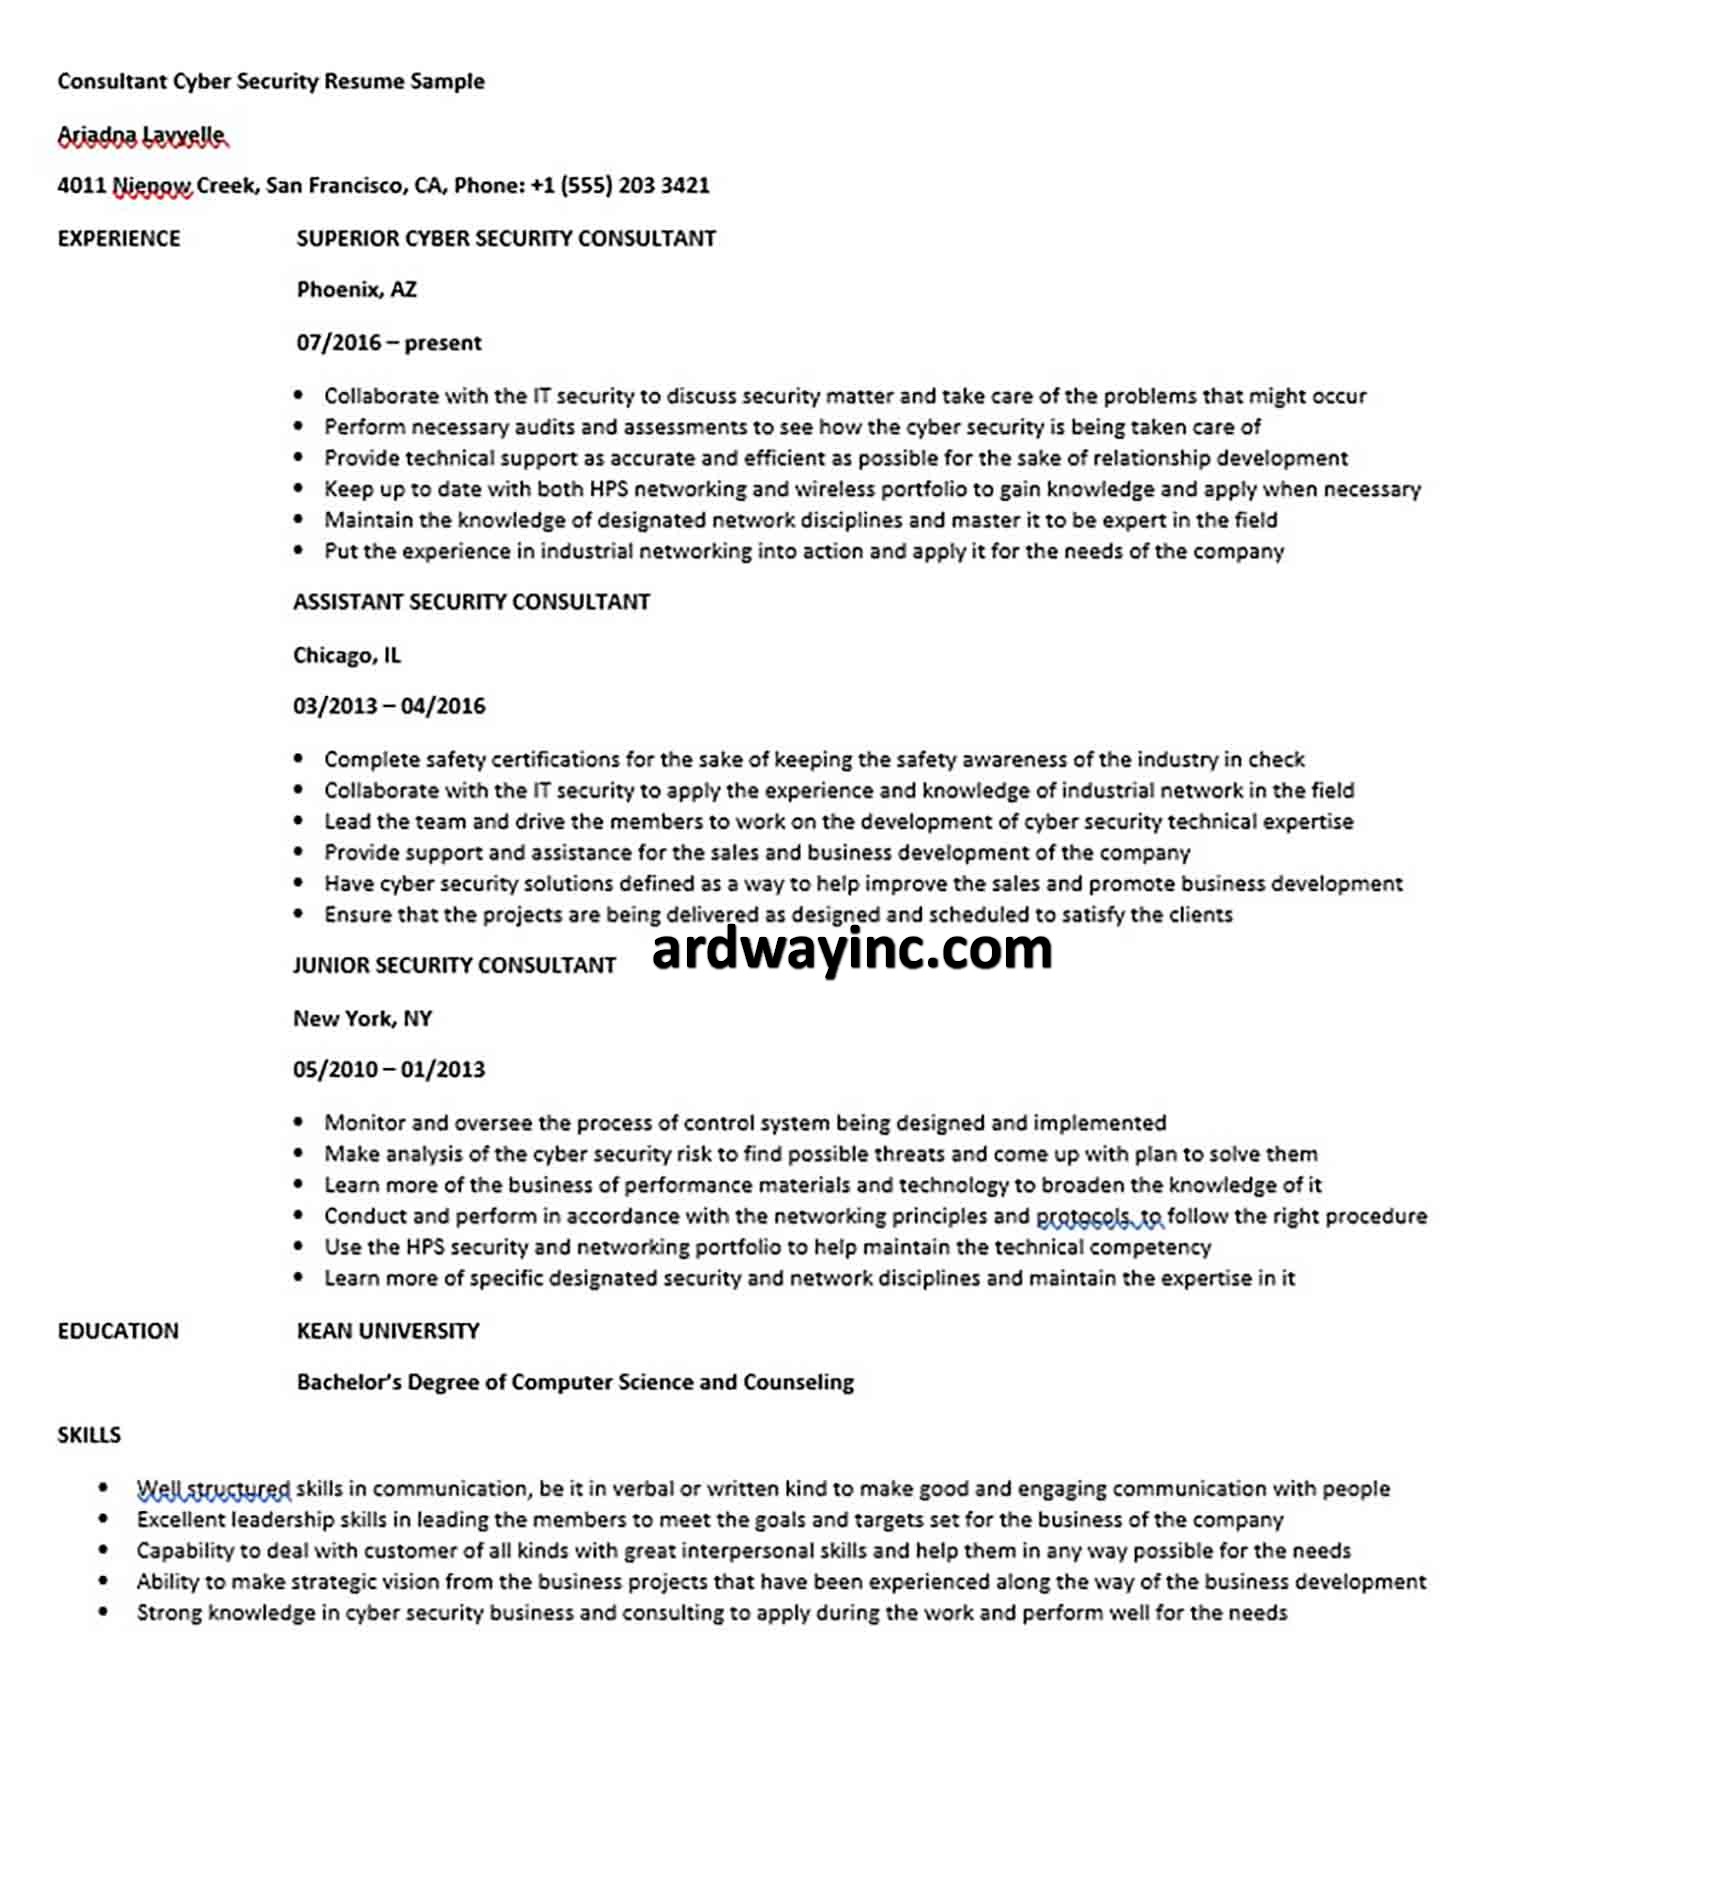 Consultant Cyber Security Resume Sample